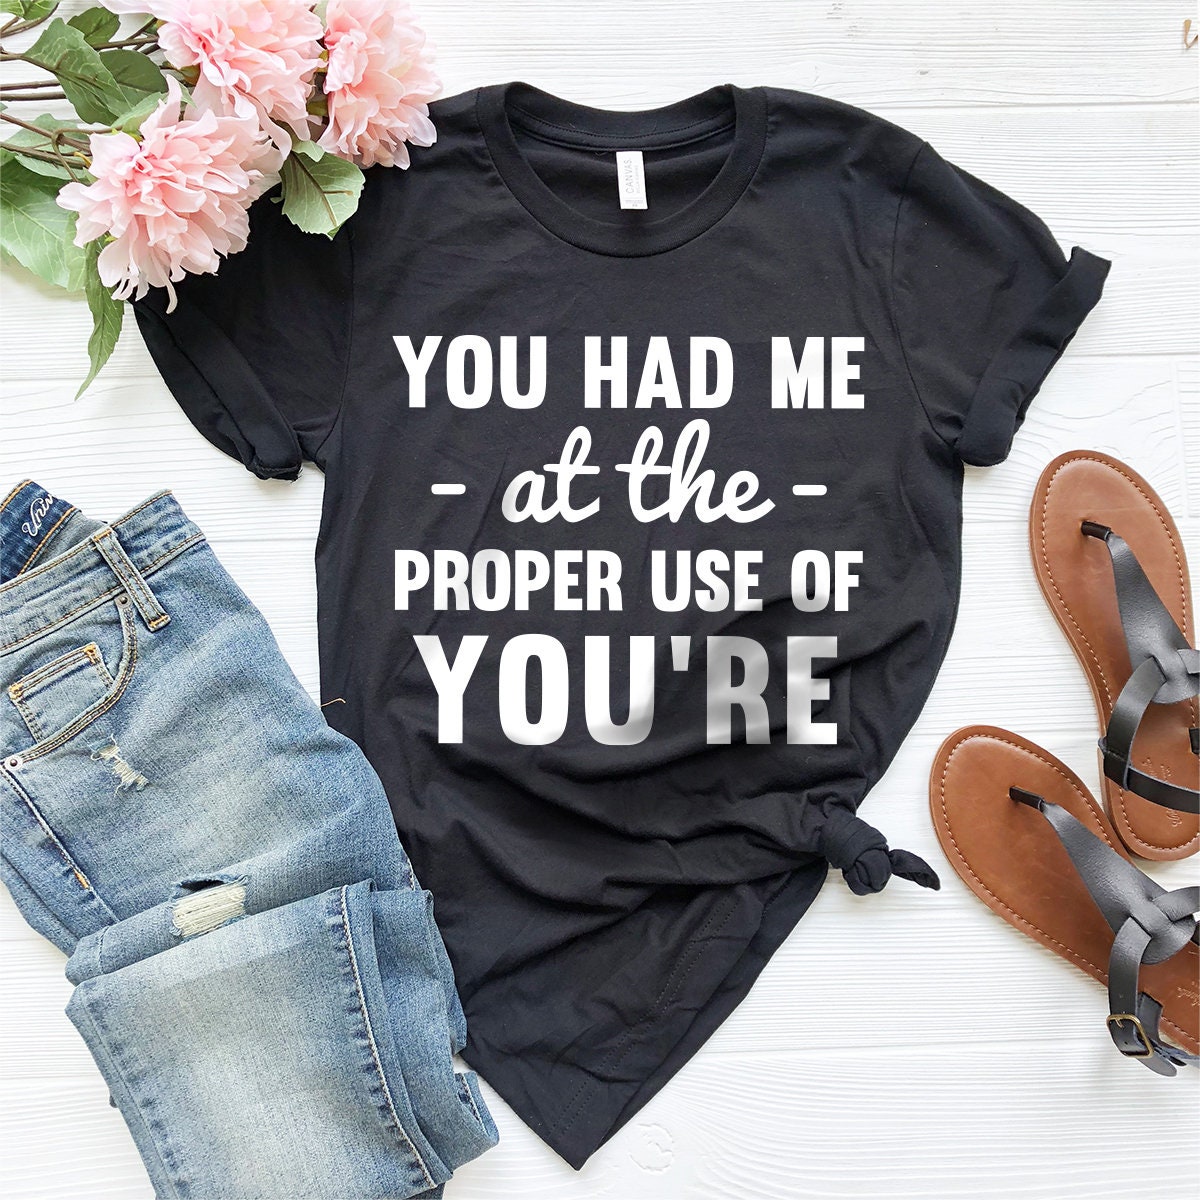 Funny Grammar Shirt, Shirts With Saying, You Had Me At The Proper Use –